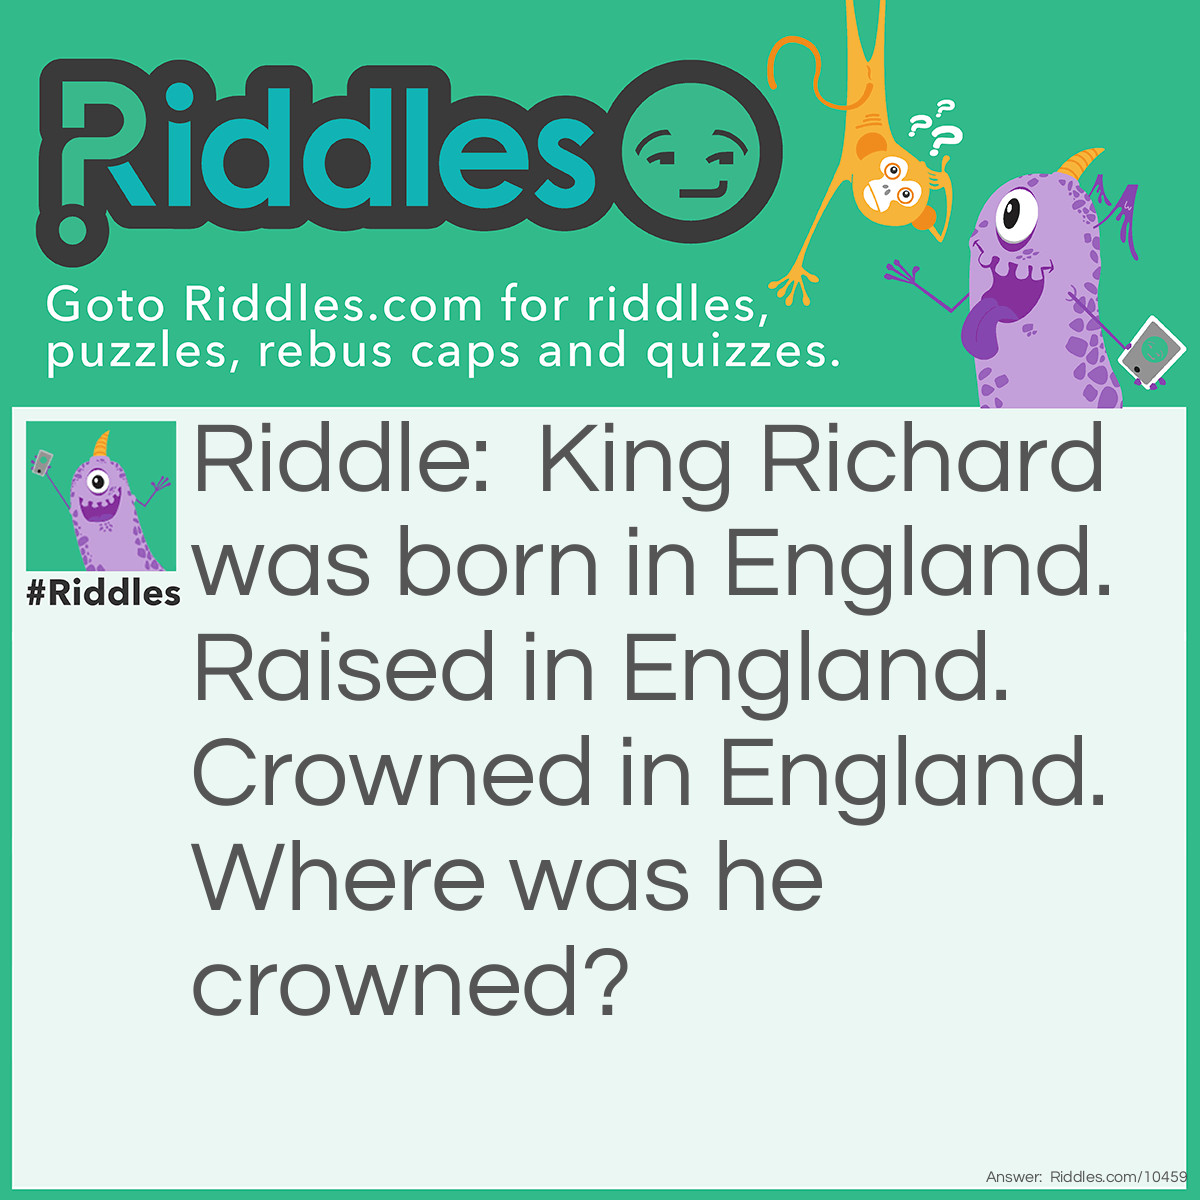 Riddle: King Richard was born in England. Raised in England. Crowned in England. Where was he crowned? Answer: On his head..